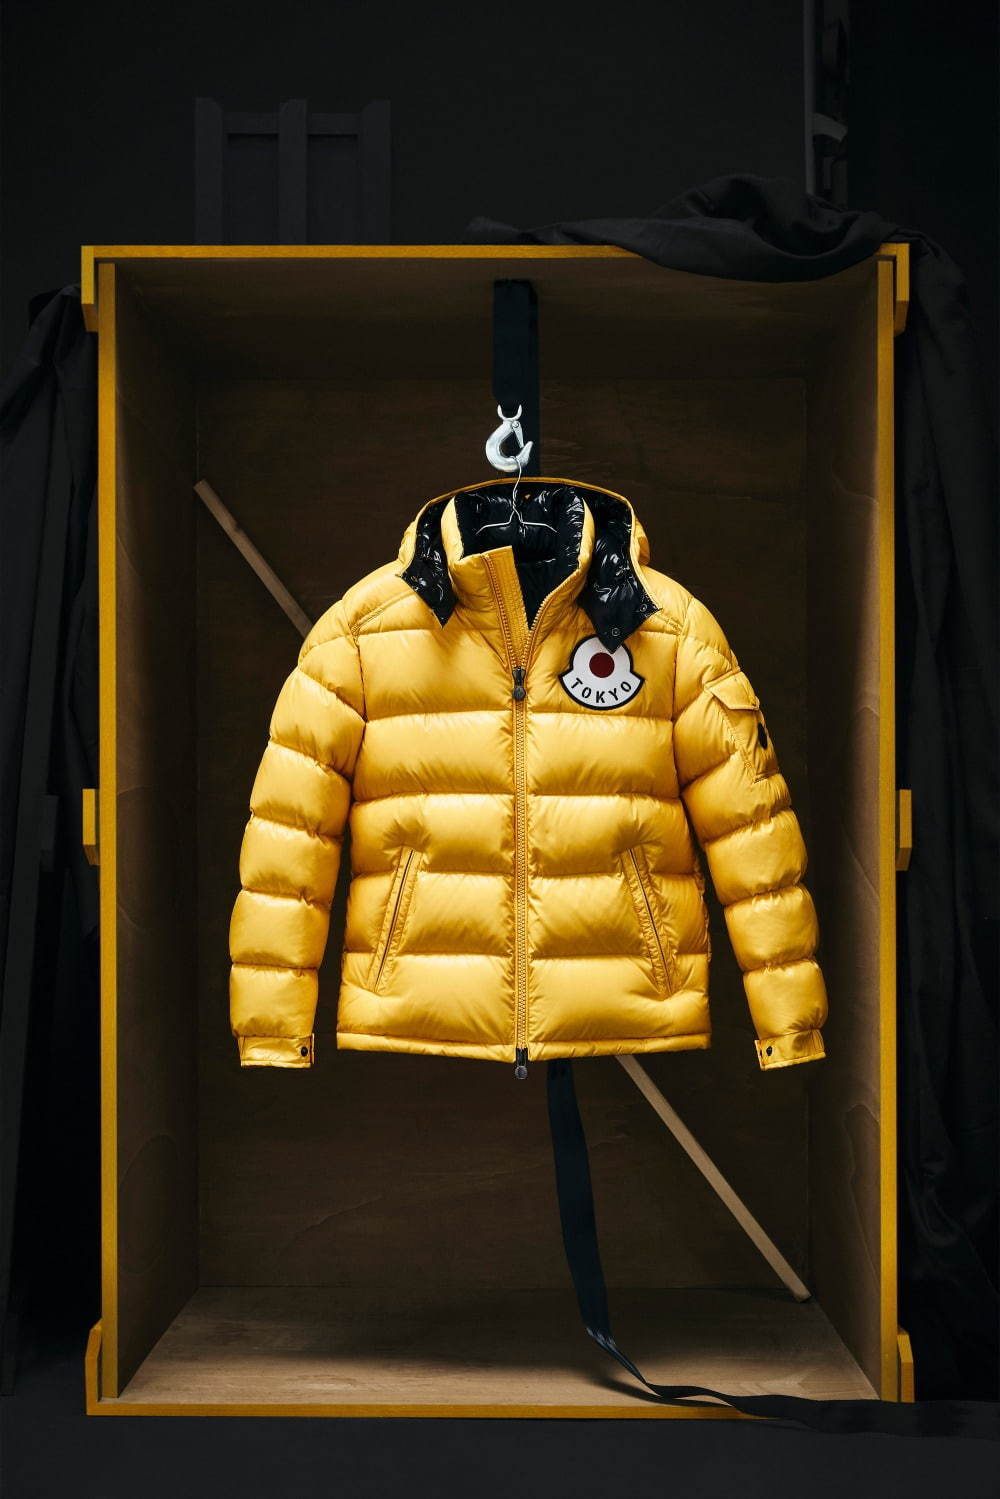 MONCLER HOUSE OF GENIUS TOKYO クラッチバッグ 東京